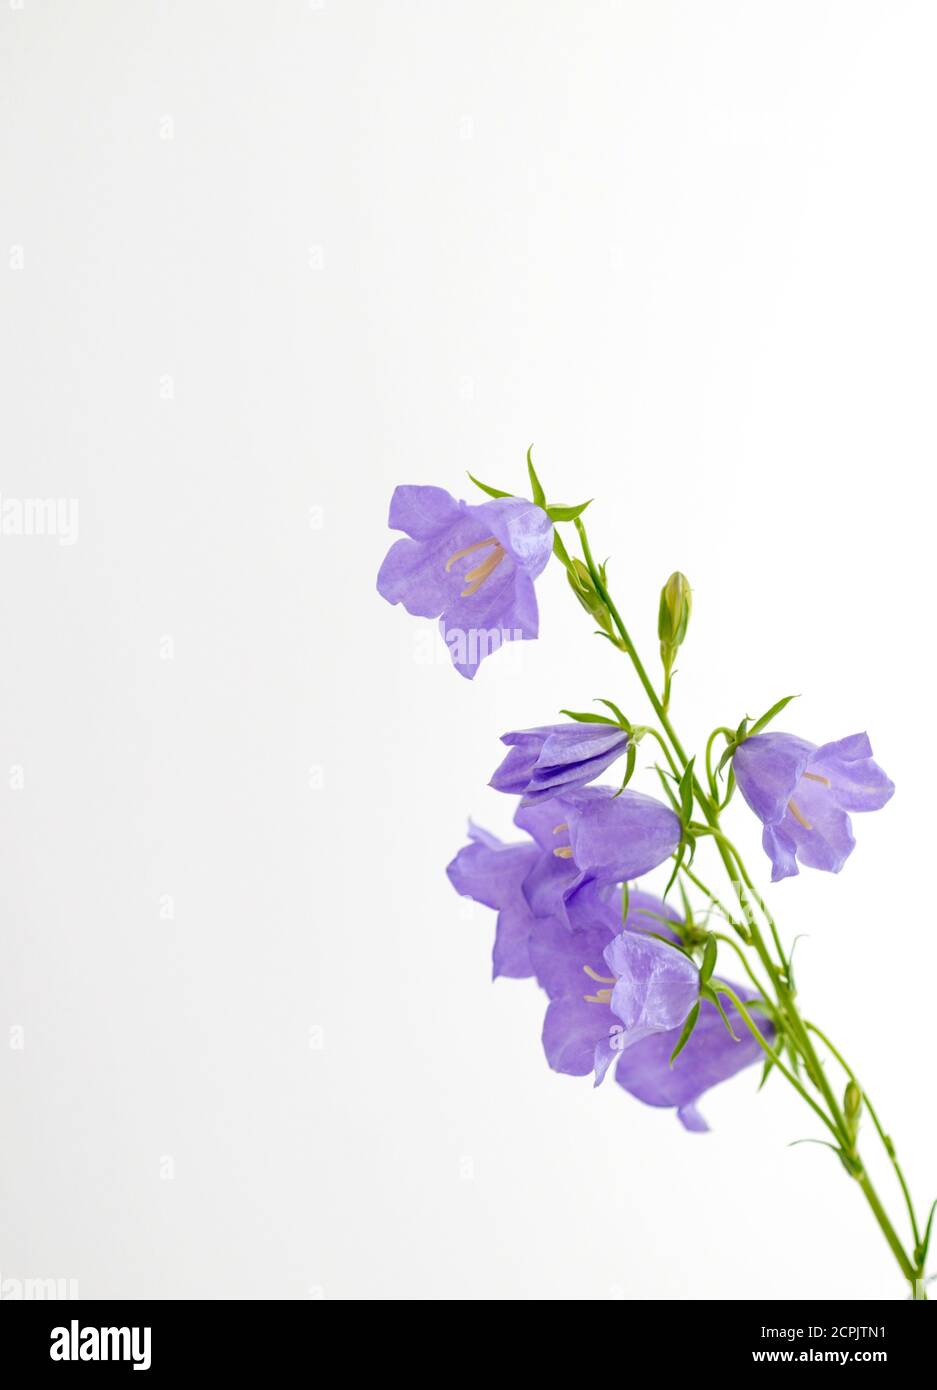 Bouquet of flowers Purple bells on a white background Stock Photo